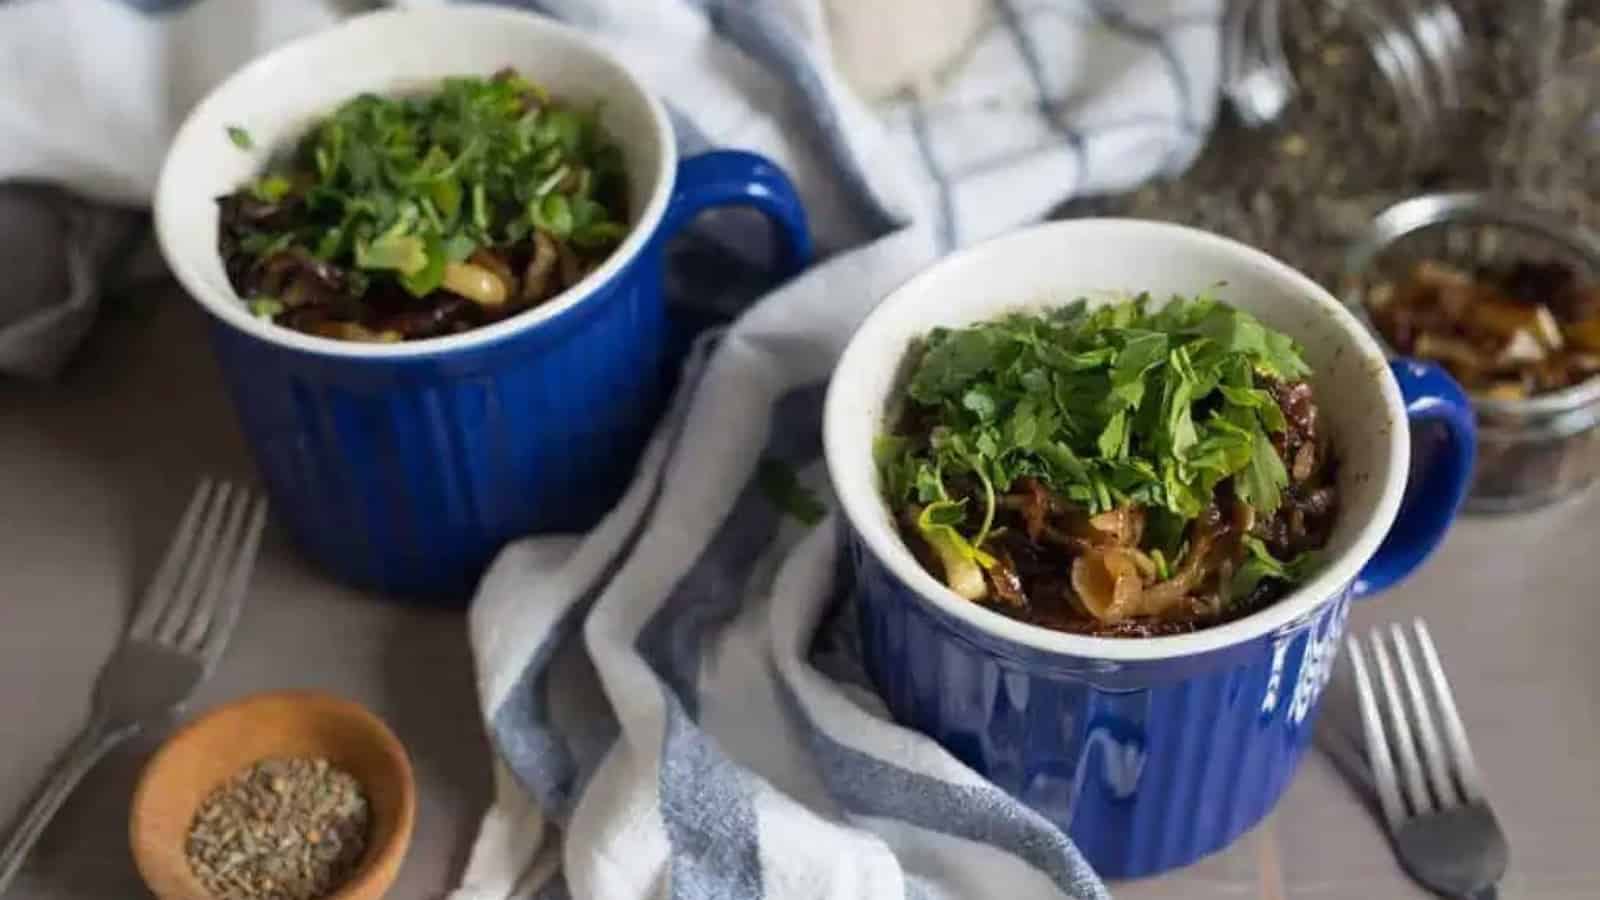 Two blue mugs filled with vegetables and herbs.